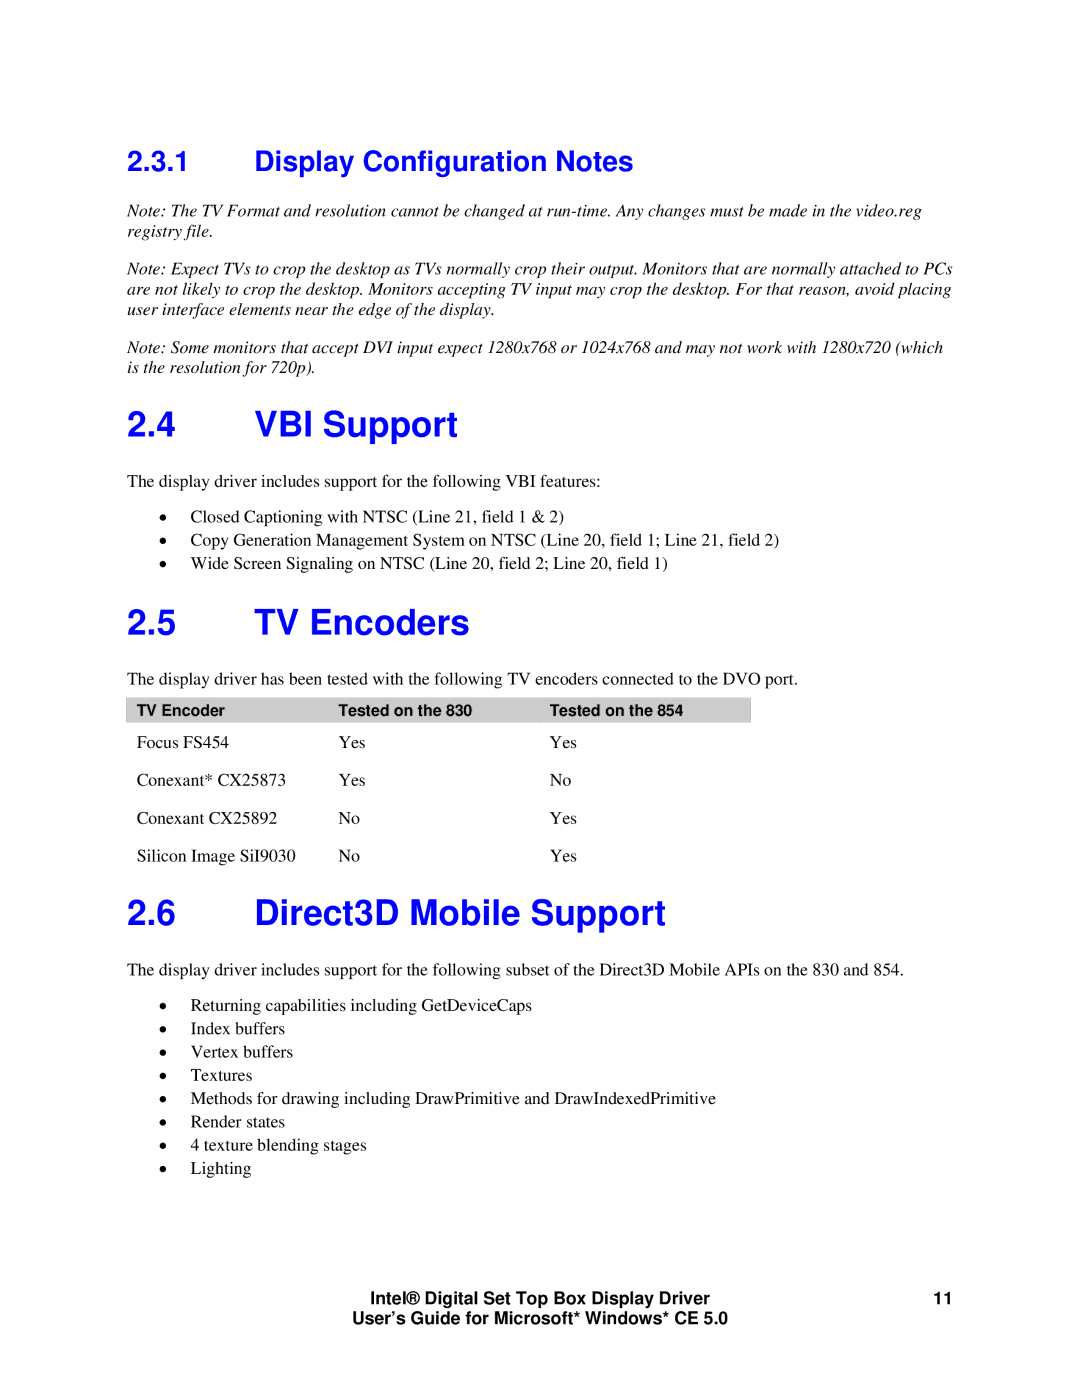 Intel 82854 GMCH, 82830M GMCH manual VBI Support, TV Encoders, Direct3D Mobile Support, Display Configuration Notes 